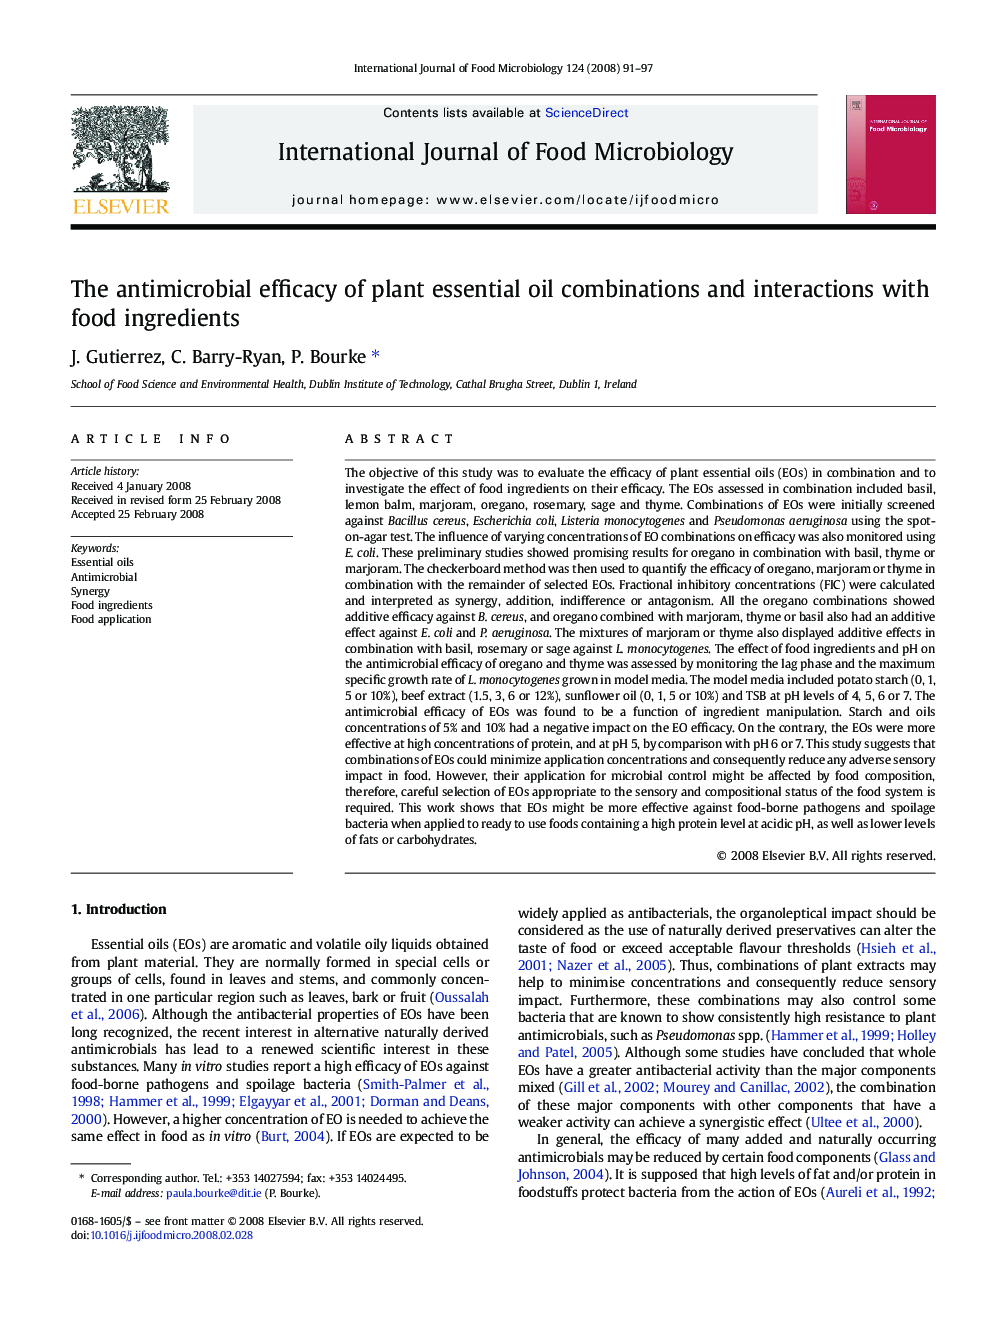 The antimicrobial efficacy of plant essential oil combinations and interactions with food ingredients